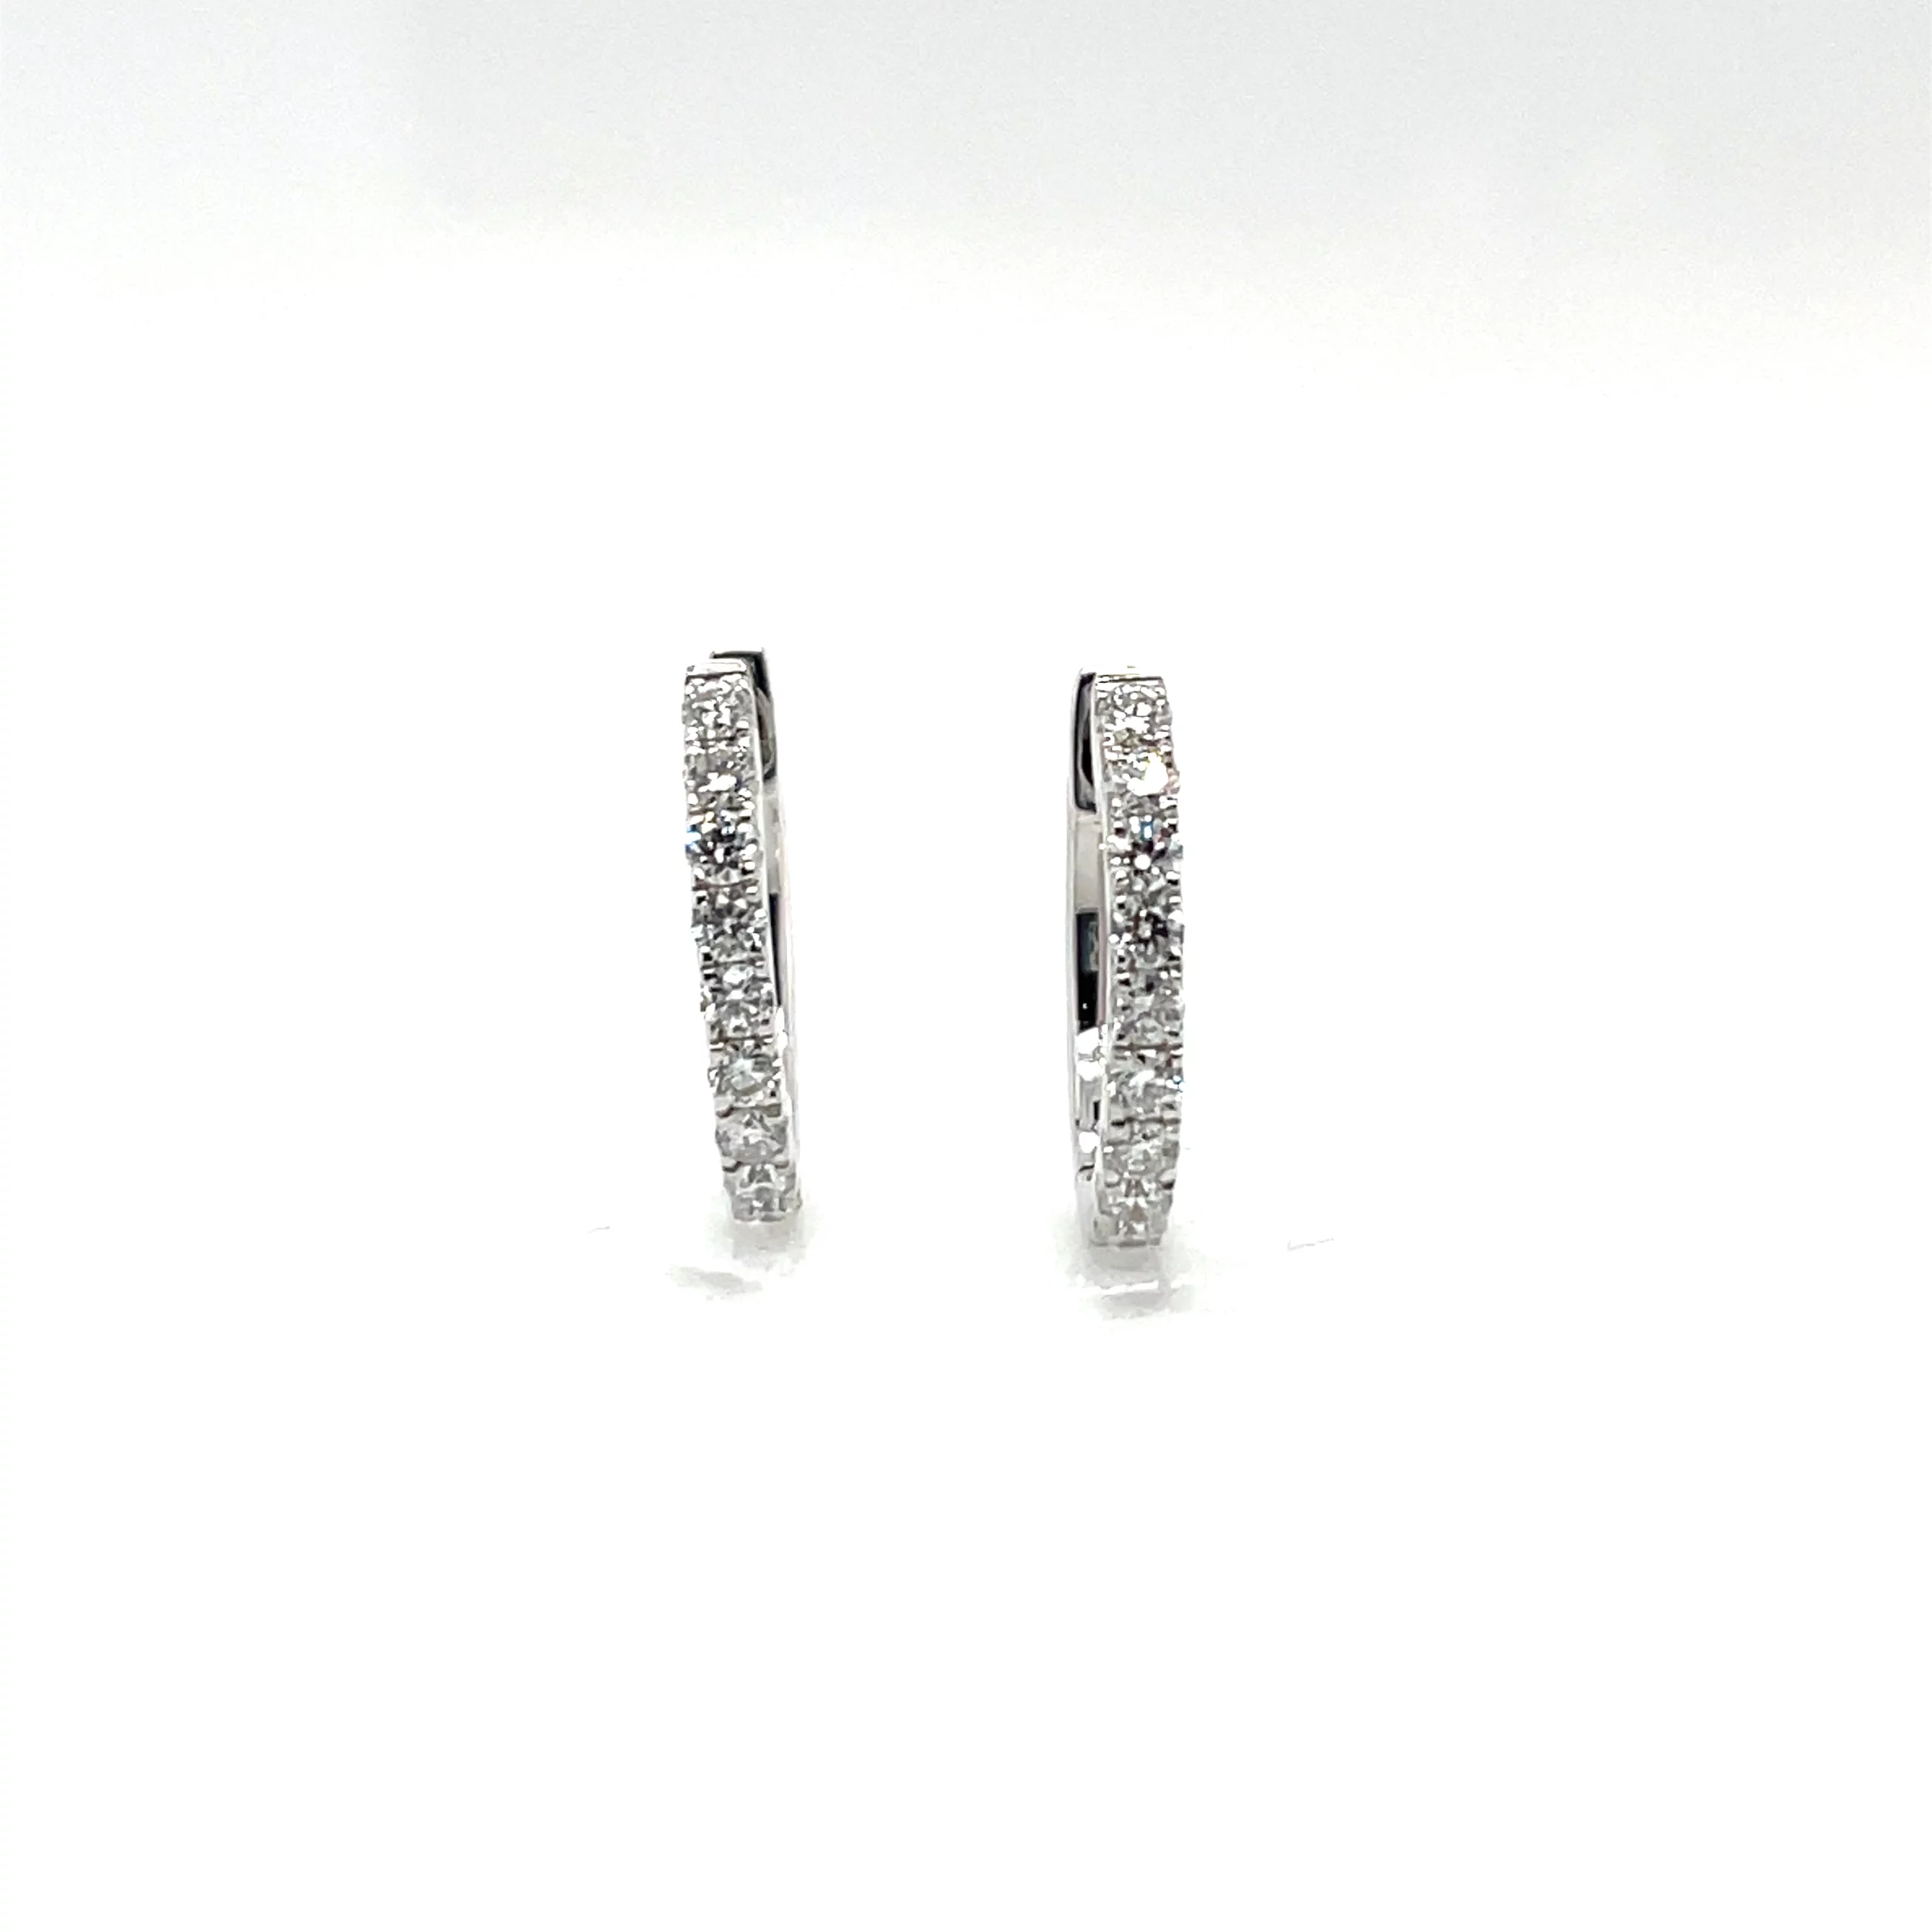 oval hoop earrings with diamonds front view from donna jewelry company chicago